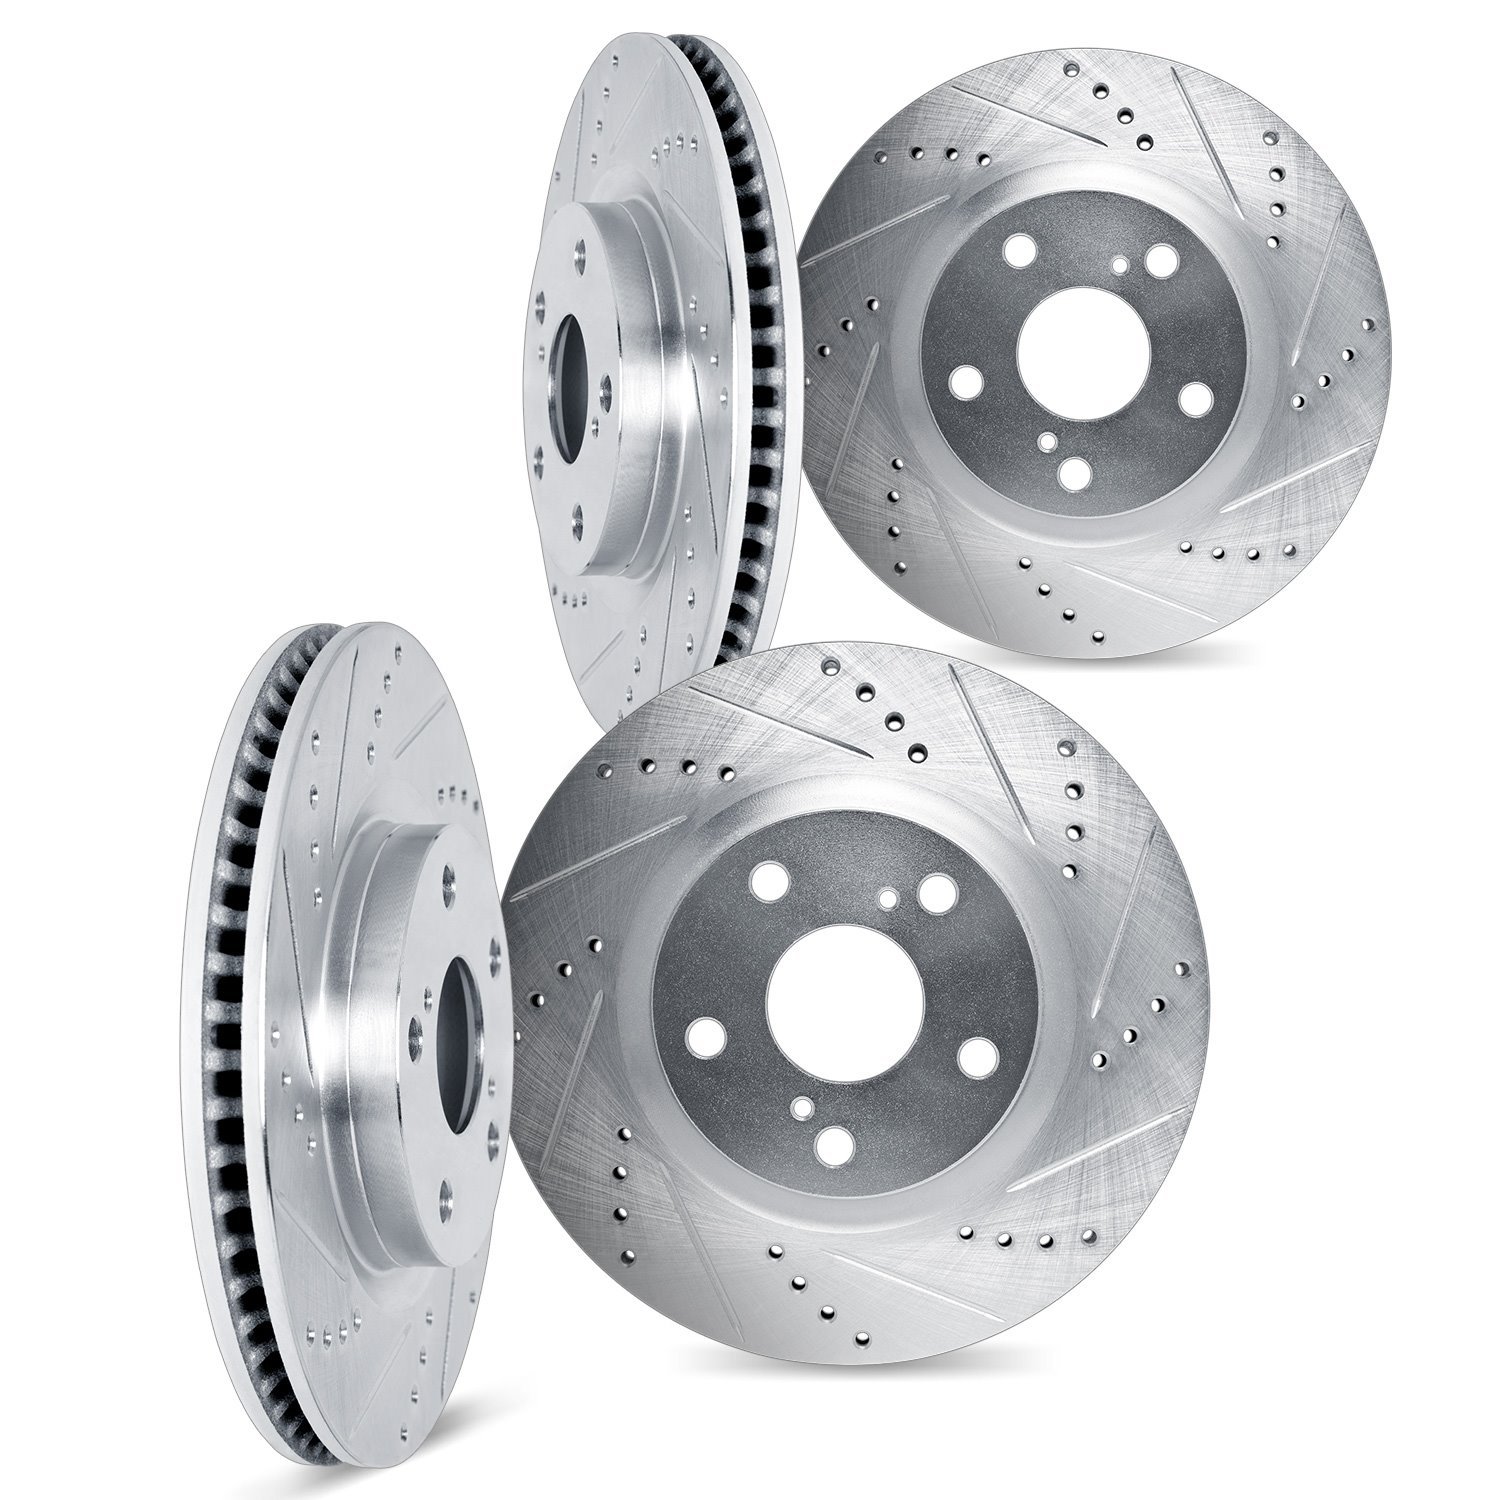 7004-67110 Drilled/Slotted Brake Rotors [Silver], 2004-2017 Infiniti/Nissan, Position: Front and Rear